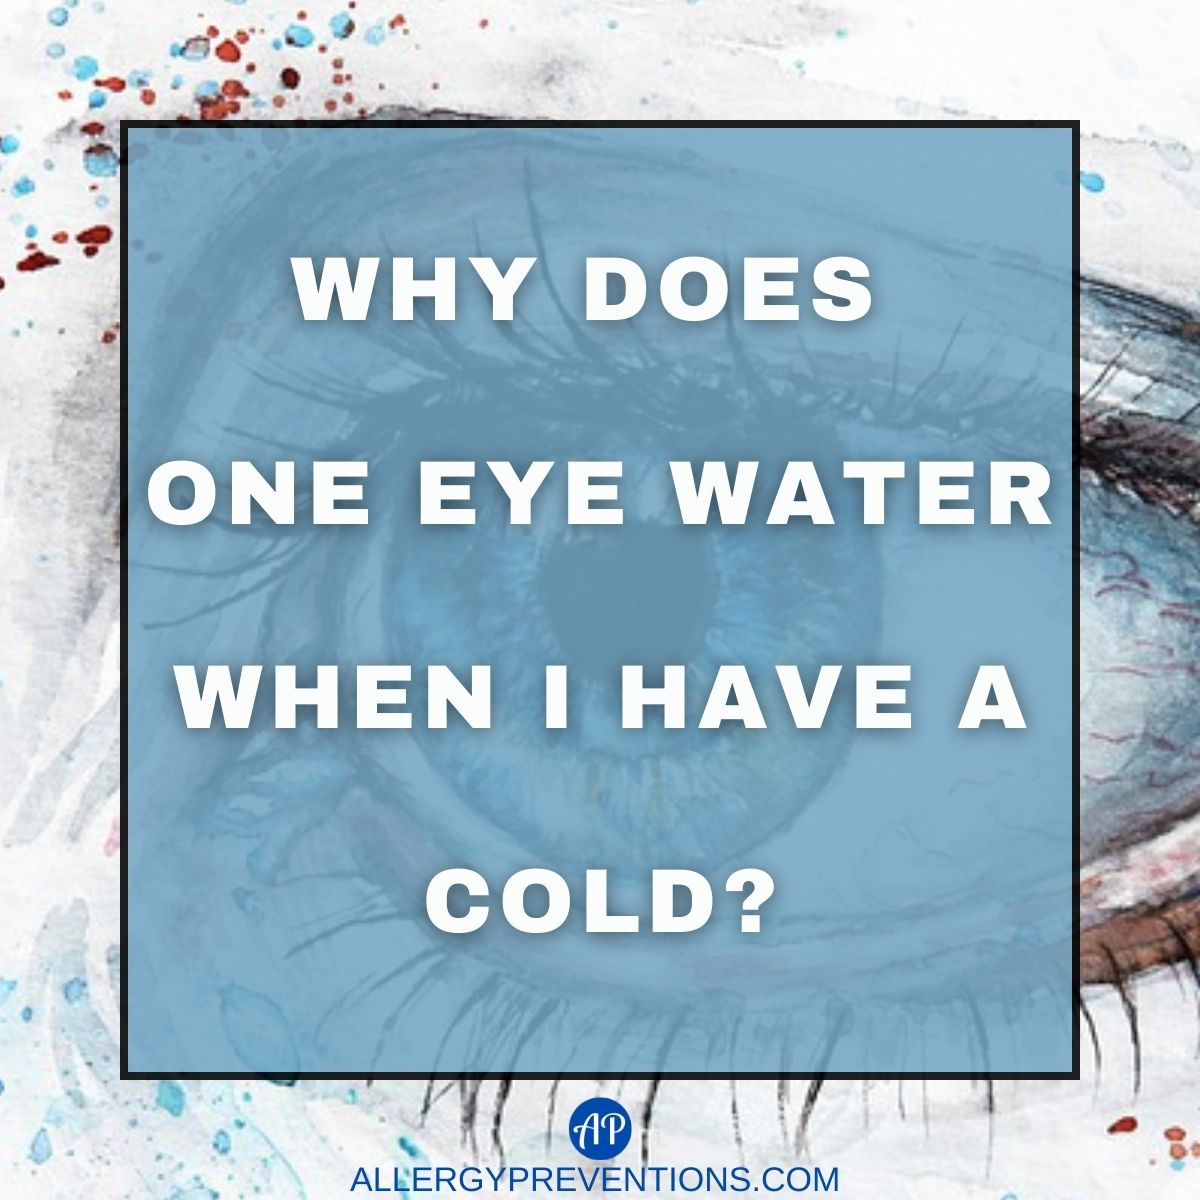 Why Does One Eye Water When I Have A Cold?